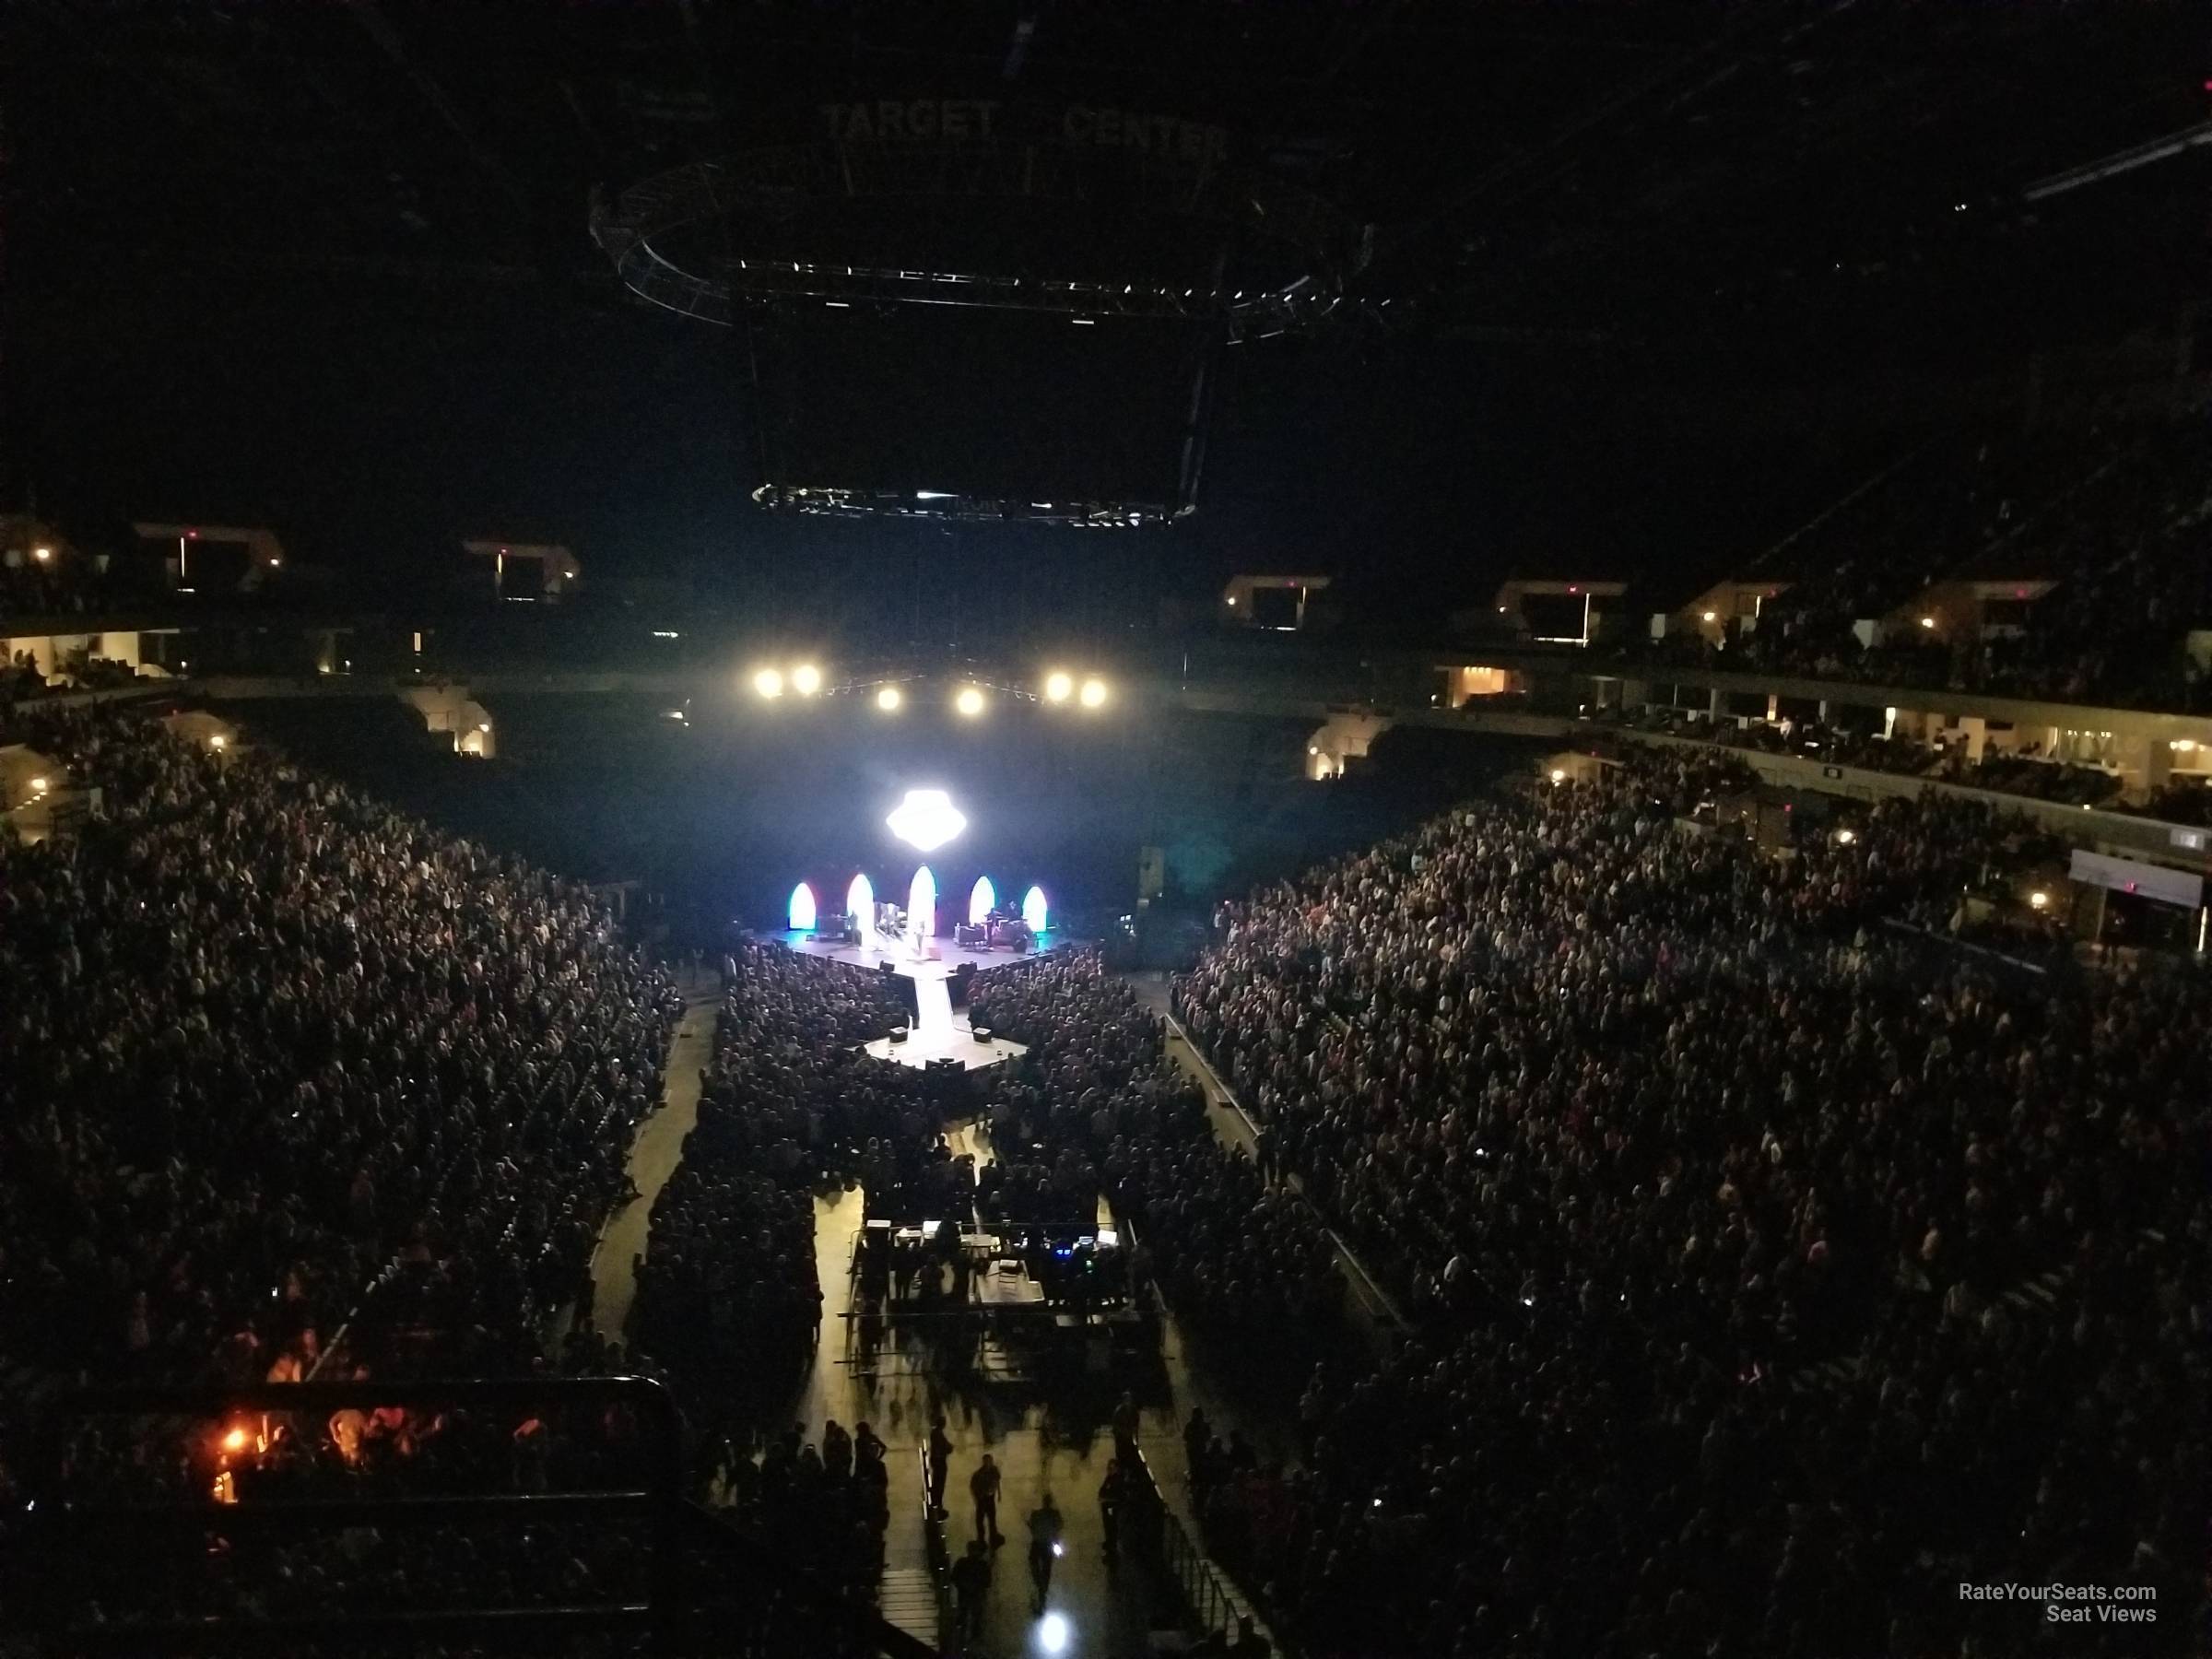 head-on concert view at Target Center